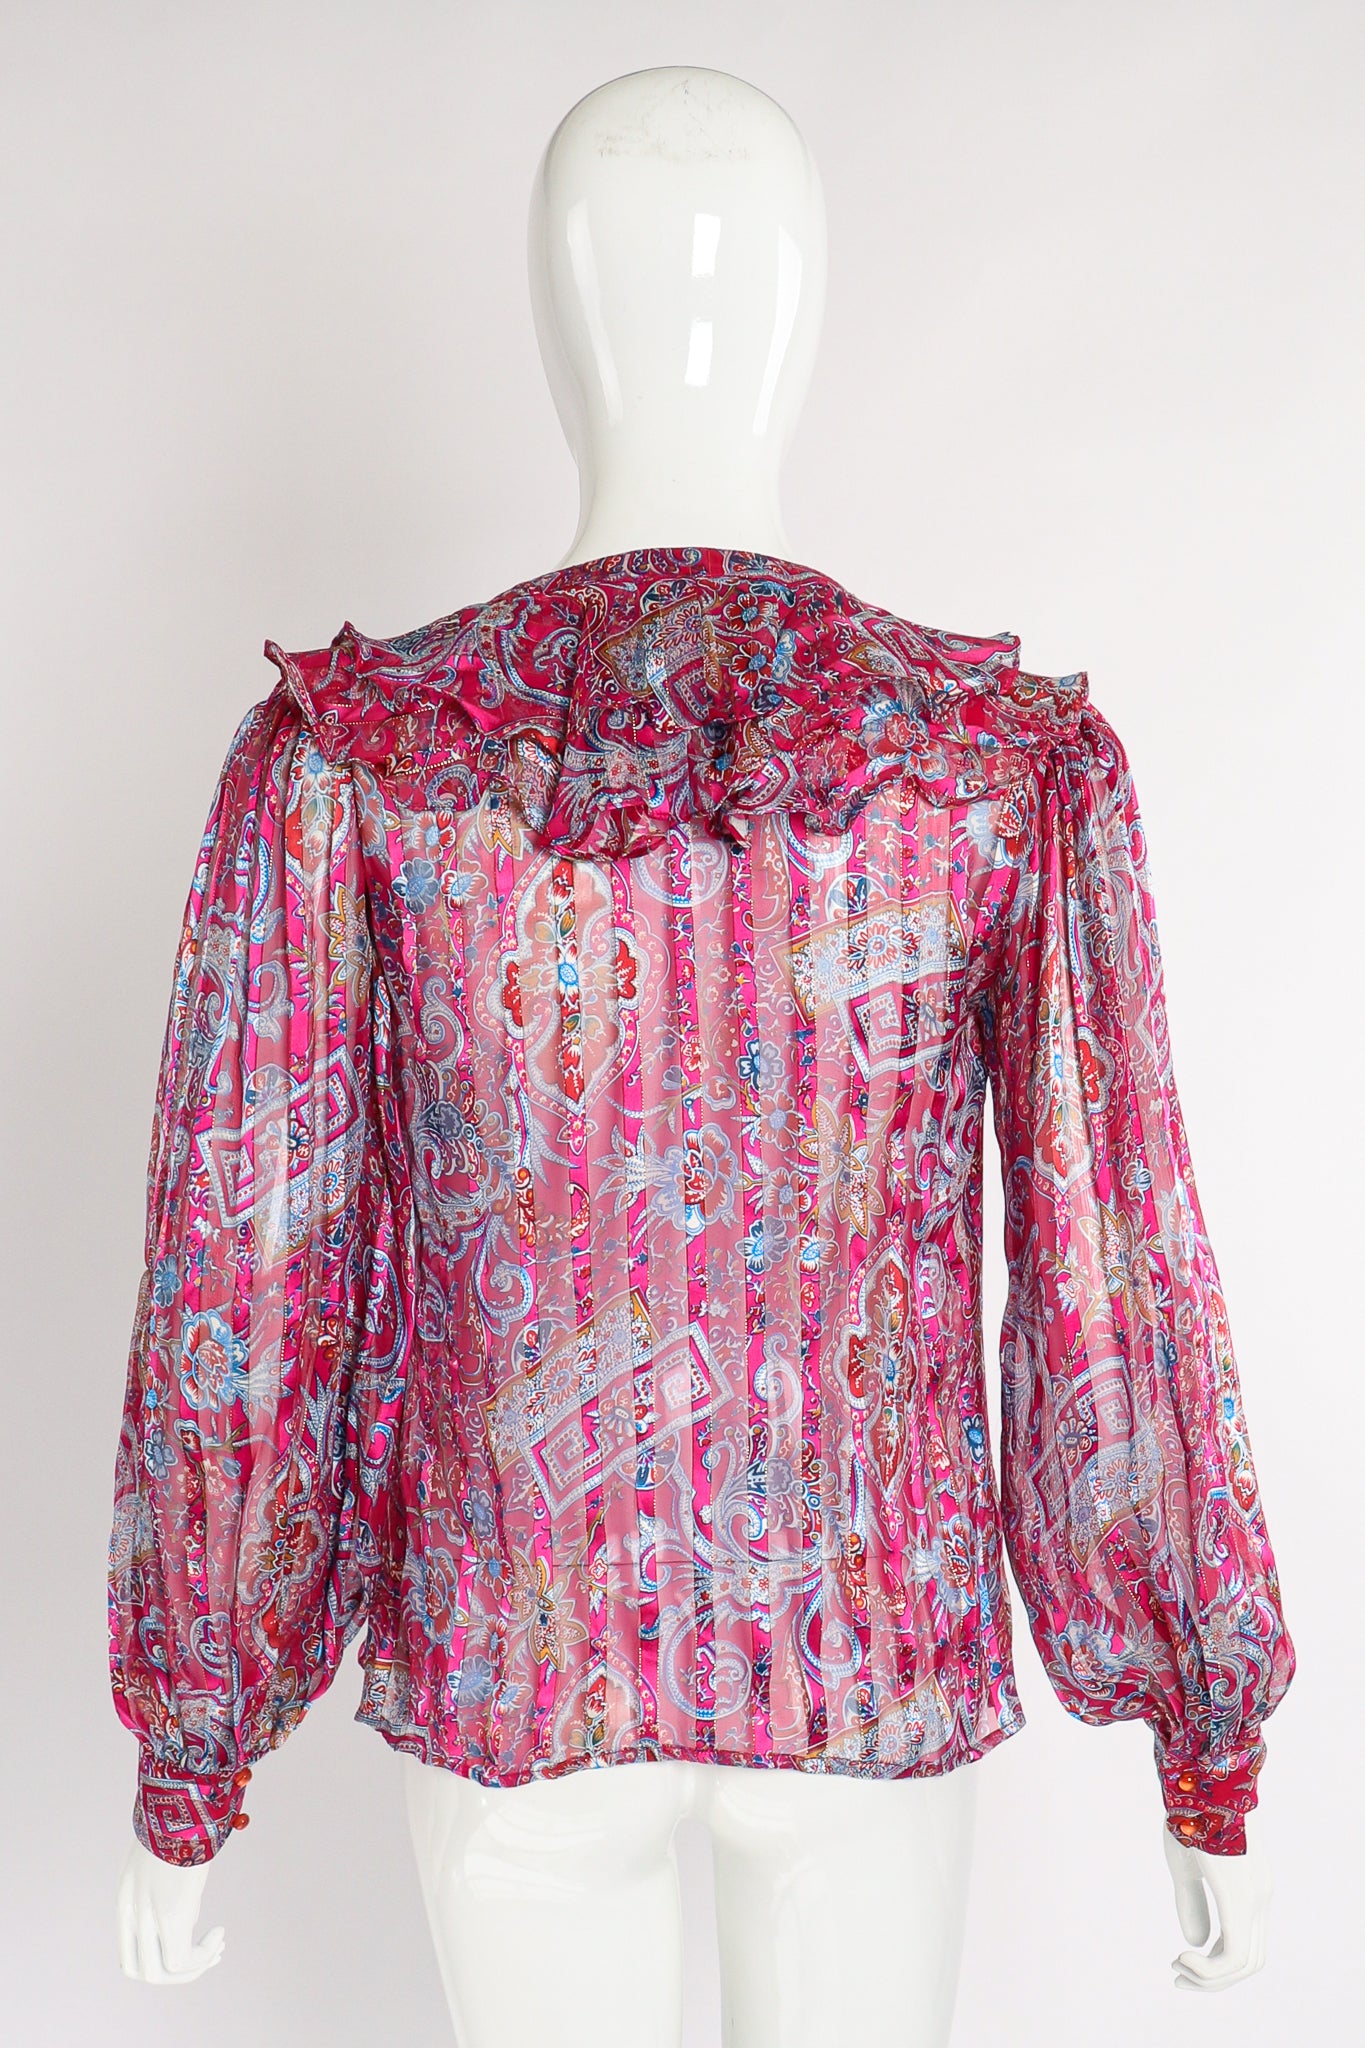 Vintage The Silk Farm Sheer Floral Stripe Ruffle Blouse on Mannequin back at Recess Los Angeles